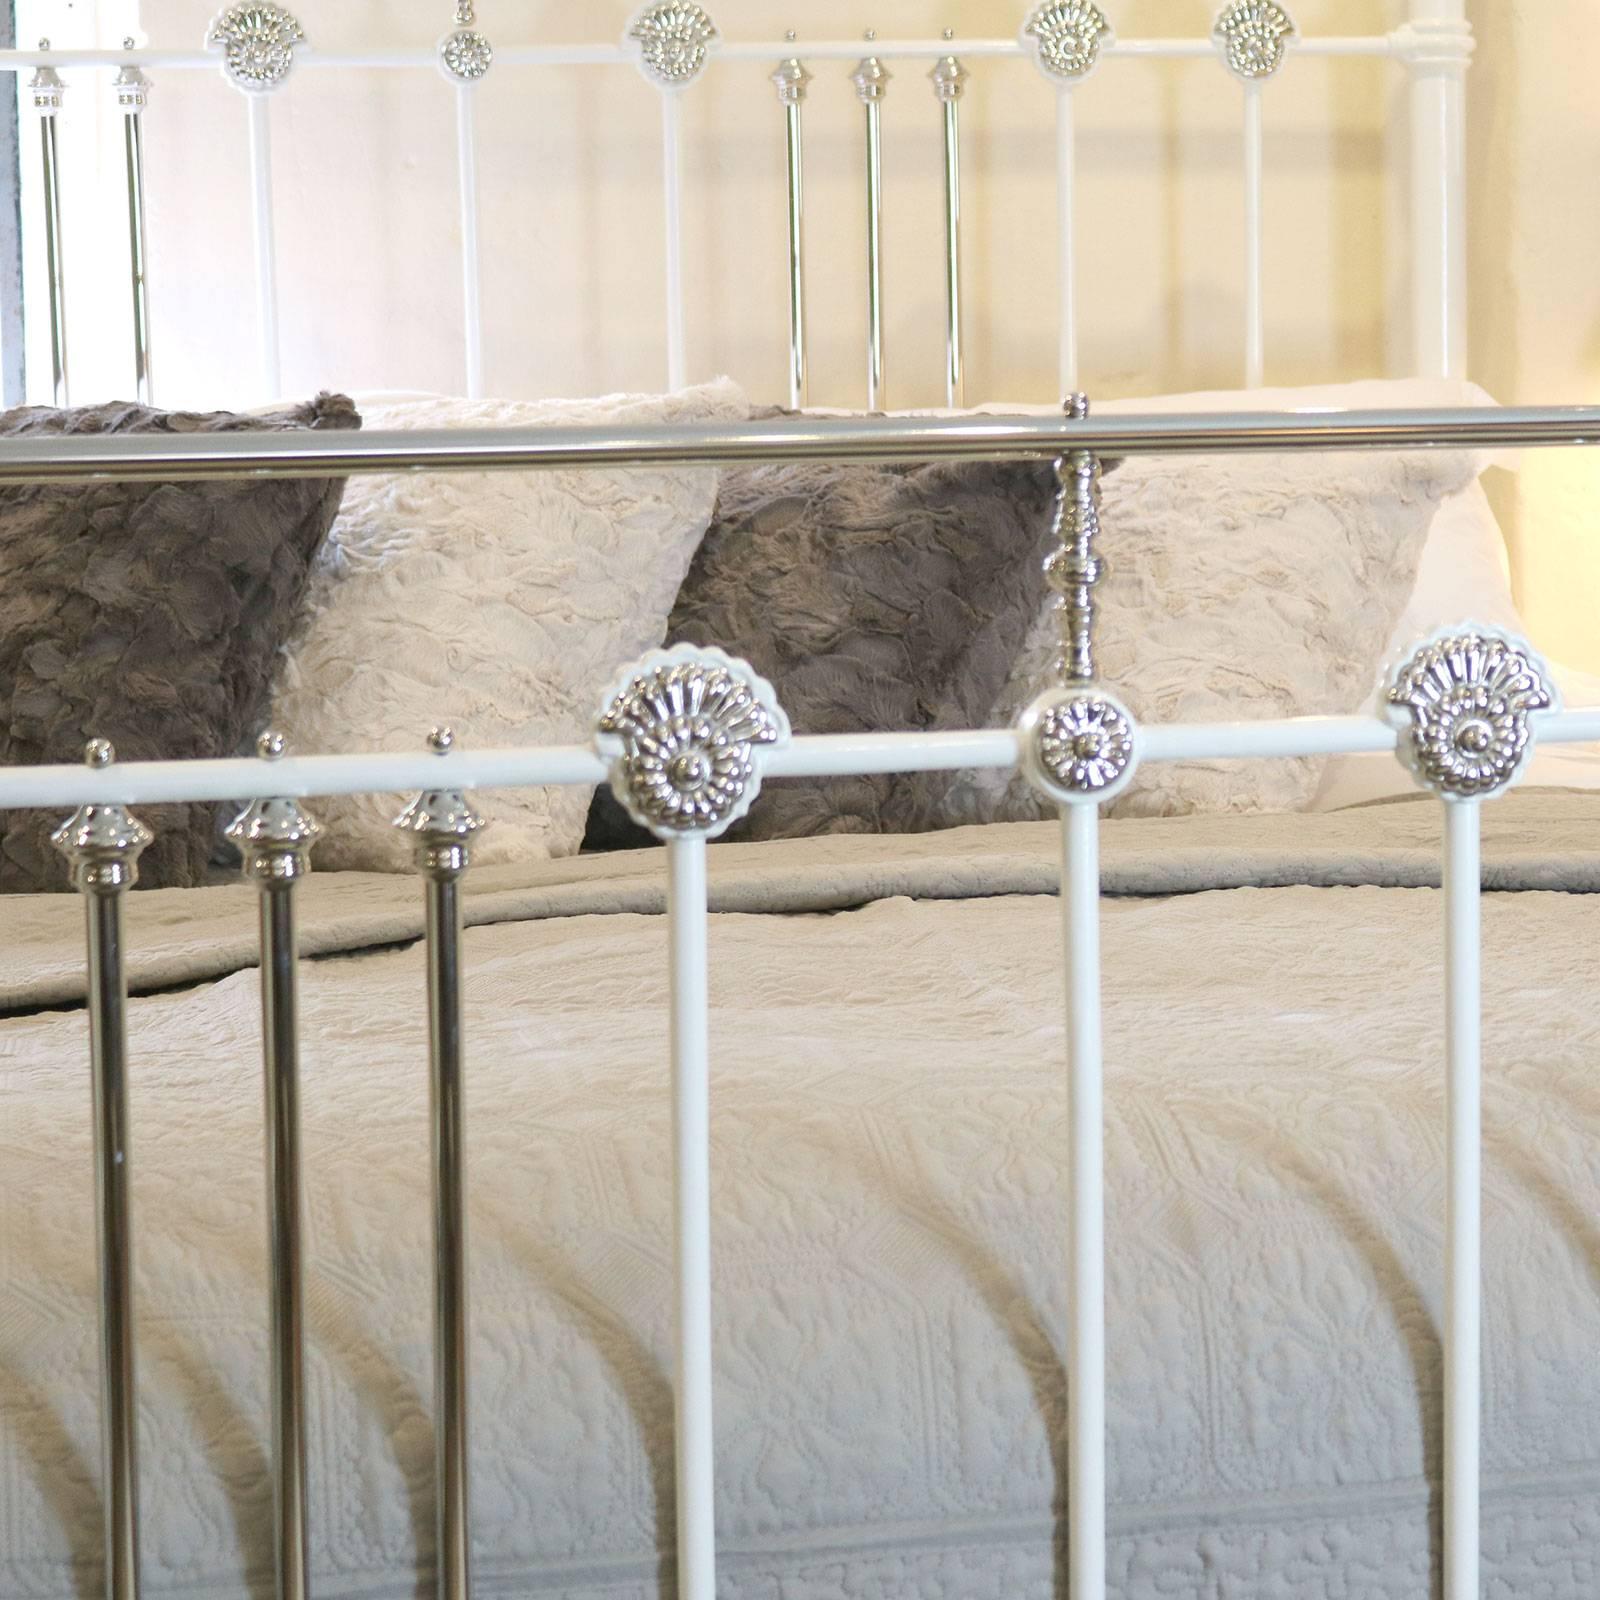 White Iron and Nickel Plated Wide Bed MSK38 1